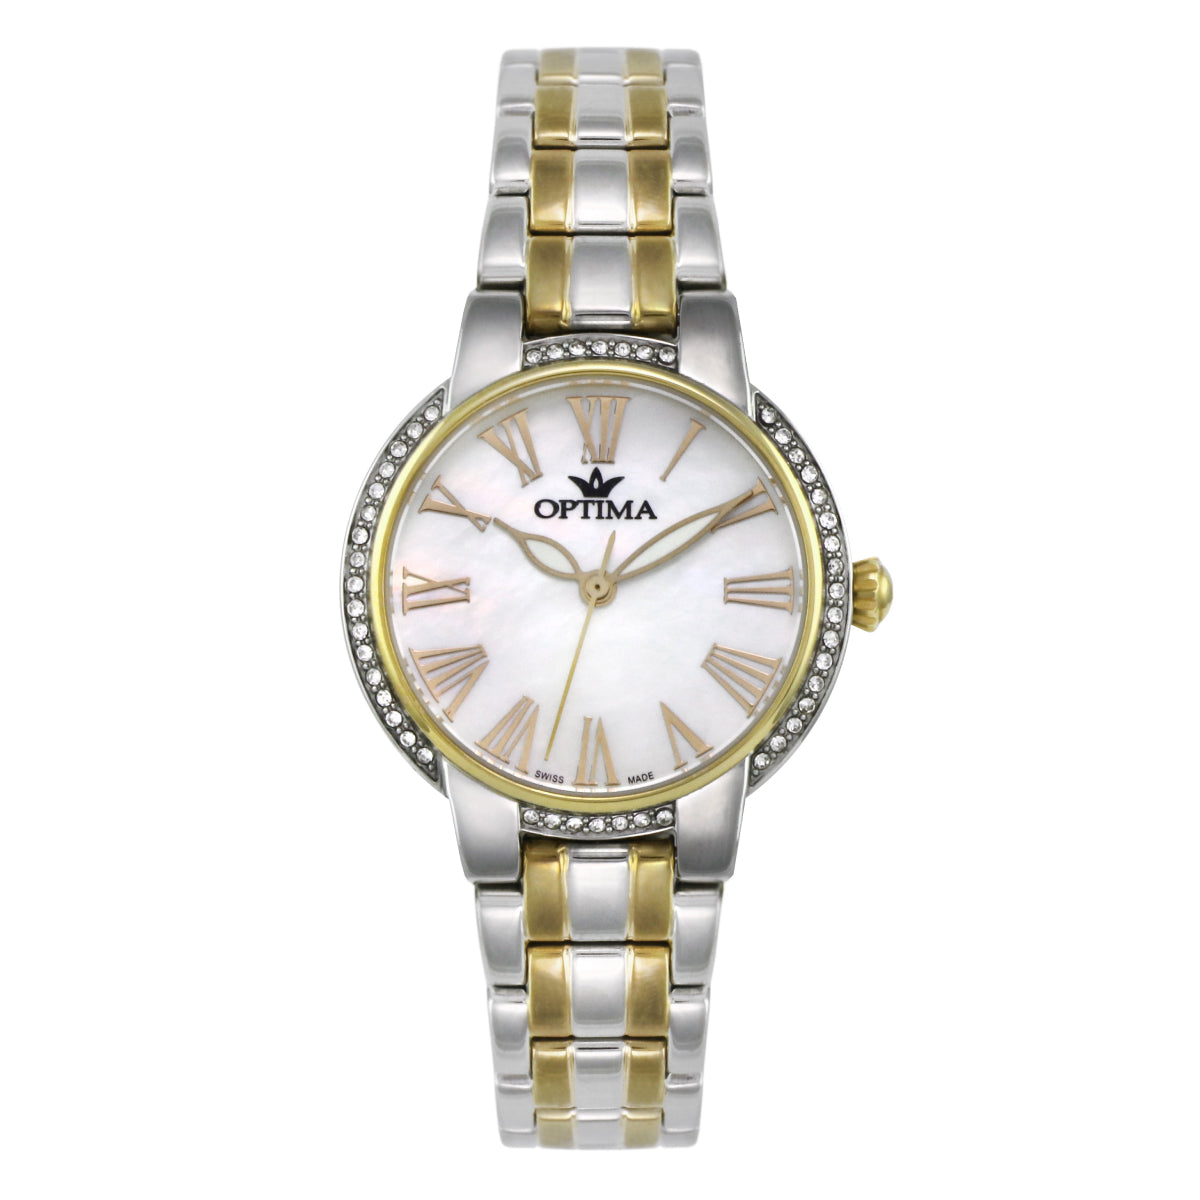 Optima Women's Swiss Quartz Watch with Pearly White Dial - OPT-0026